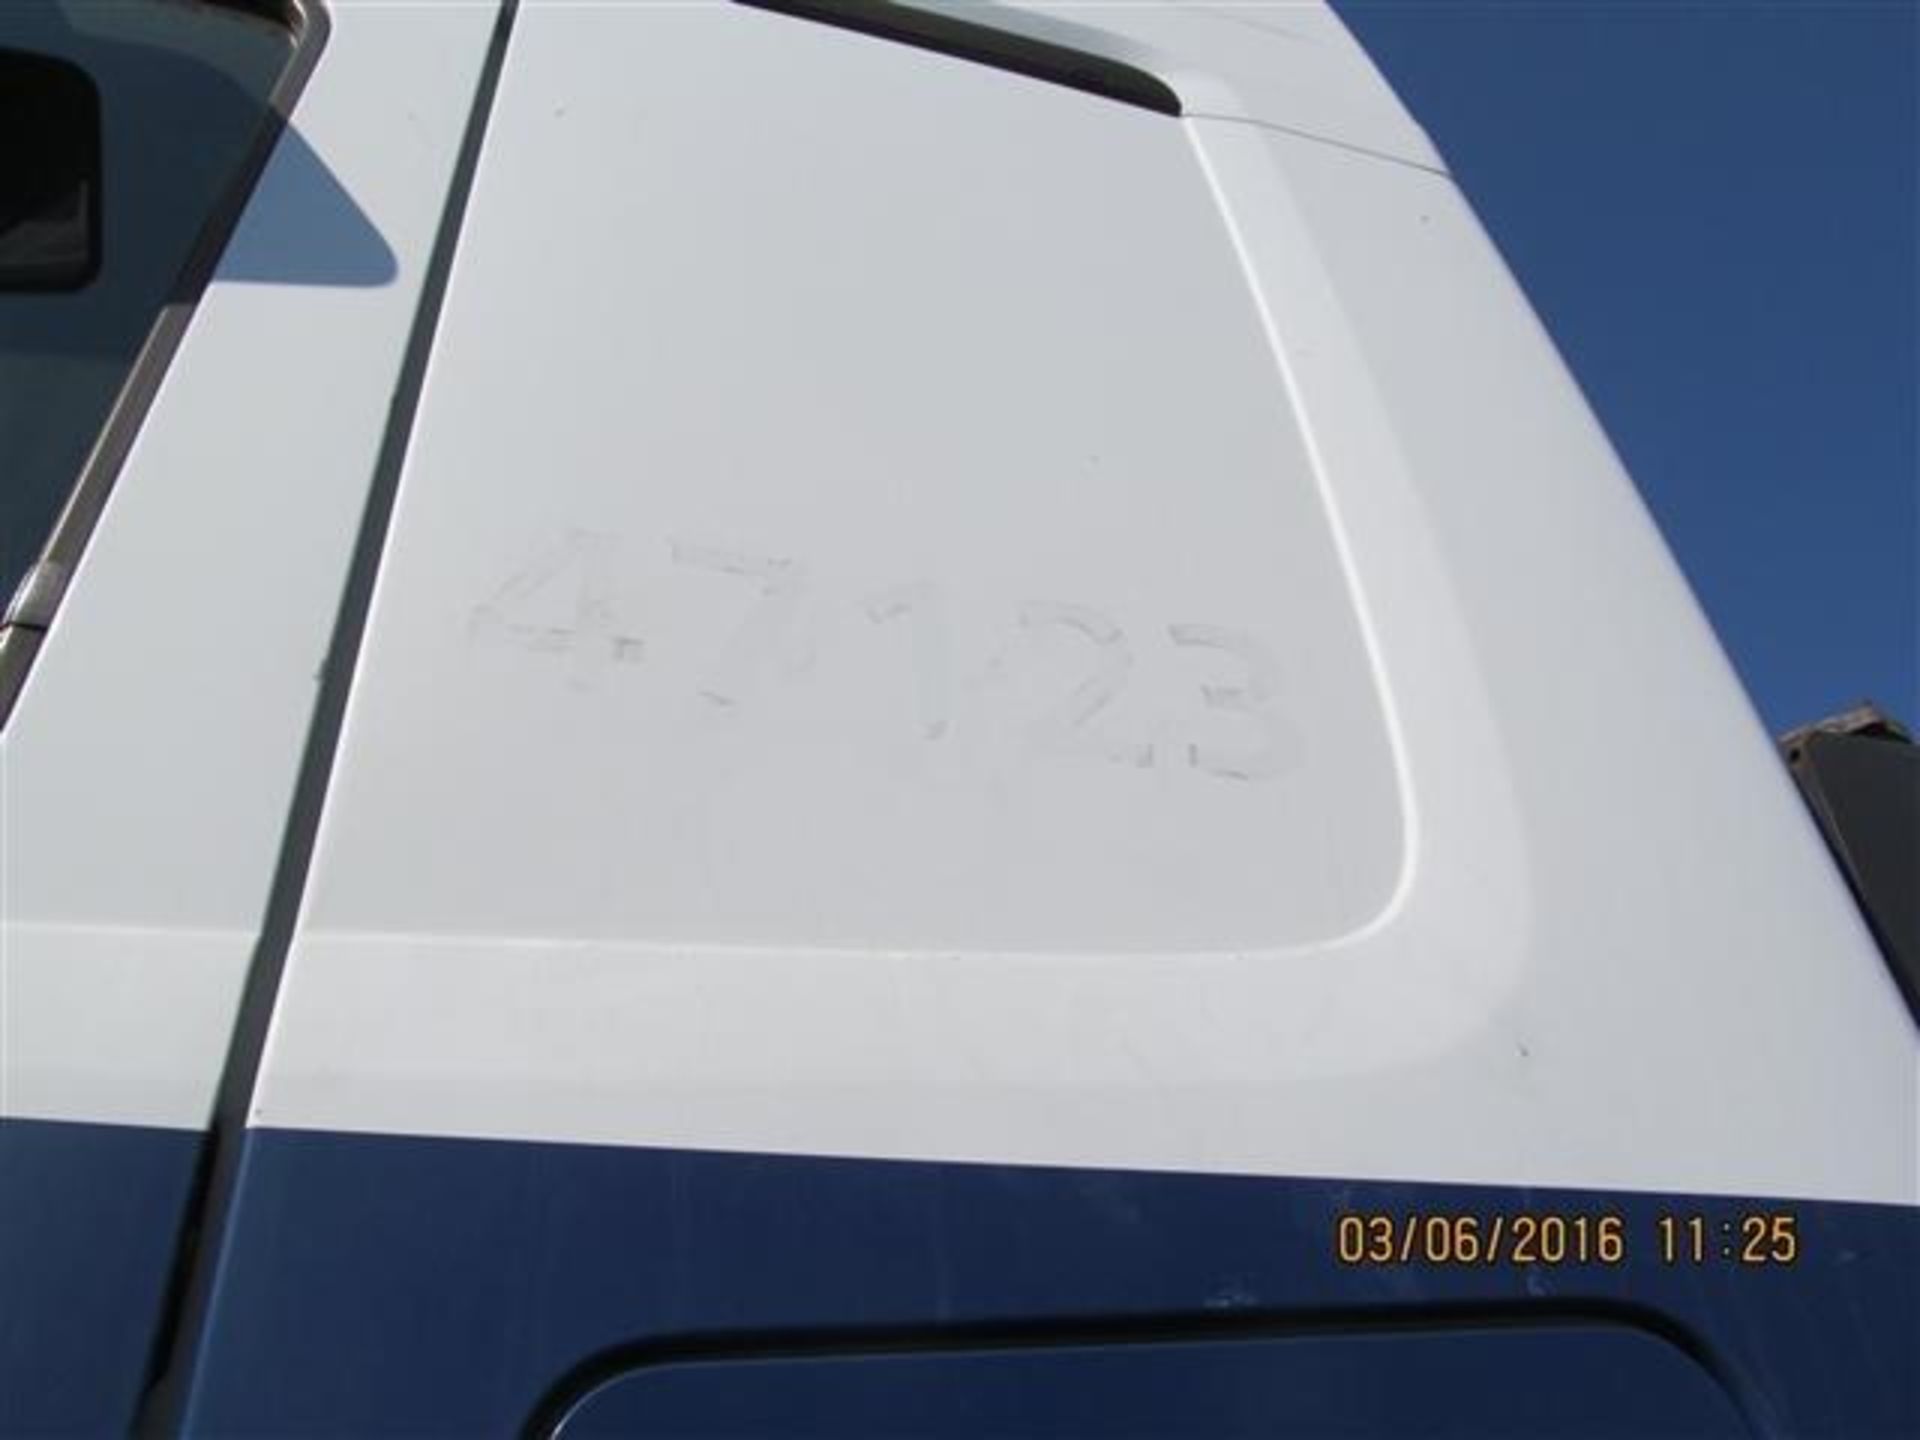 2007 M/BENZ ACTROS 2648 6X4 T/T - (VWY184GP) - Image 3 of 8